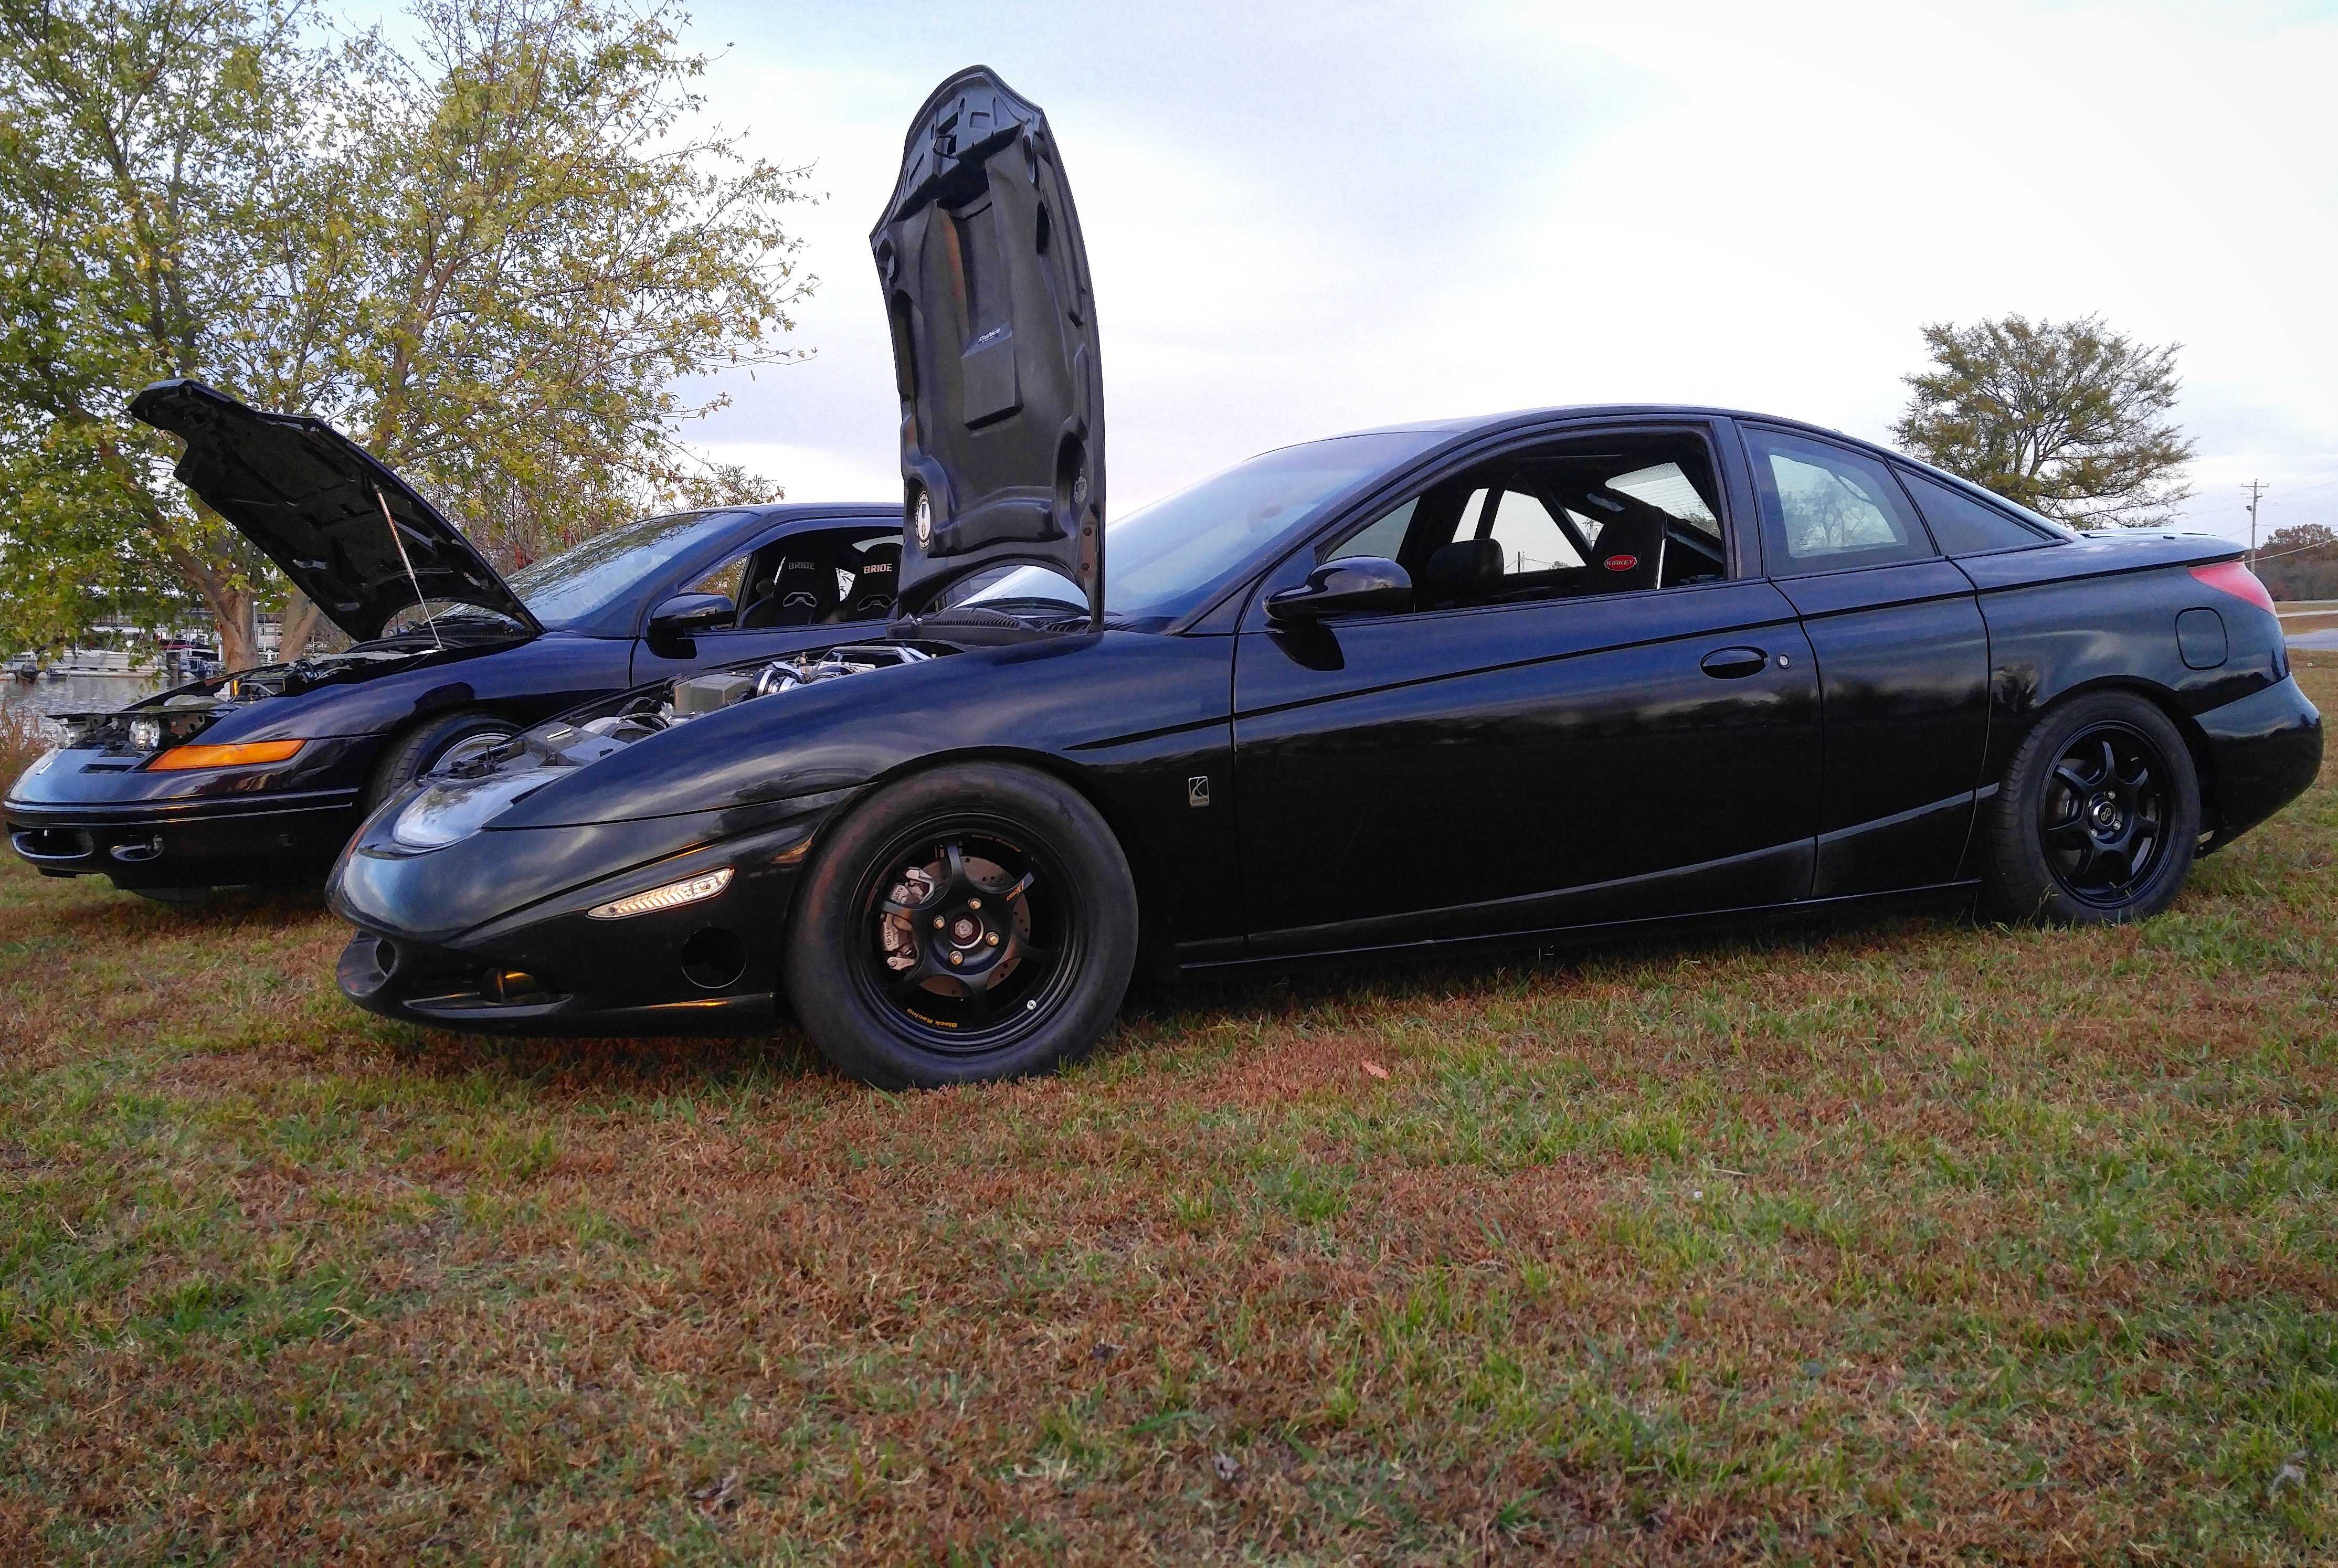 A Tuner Car Of A Different Feather: Aaron Cox’s Saturn SC2